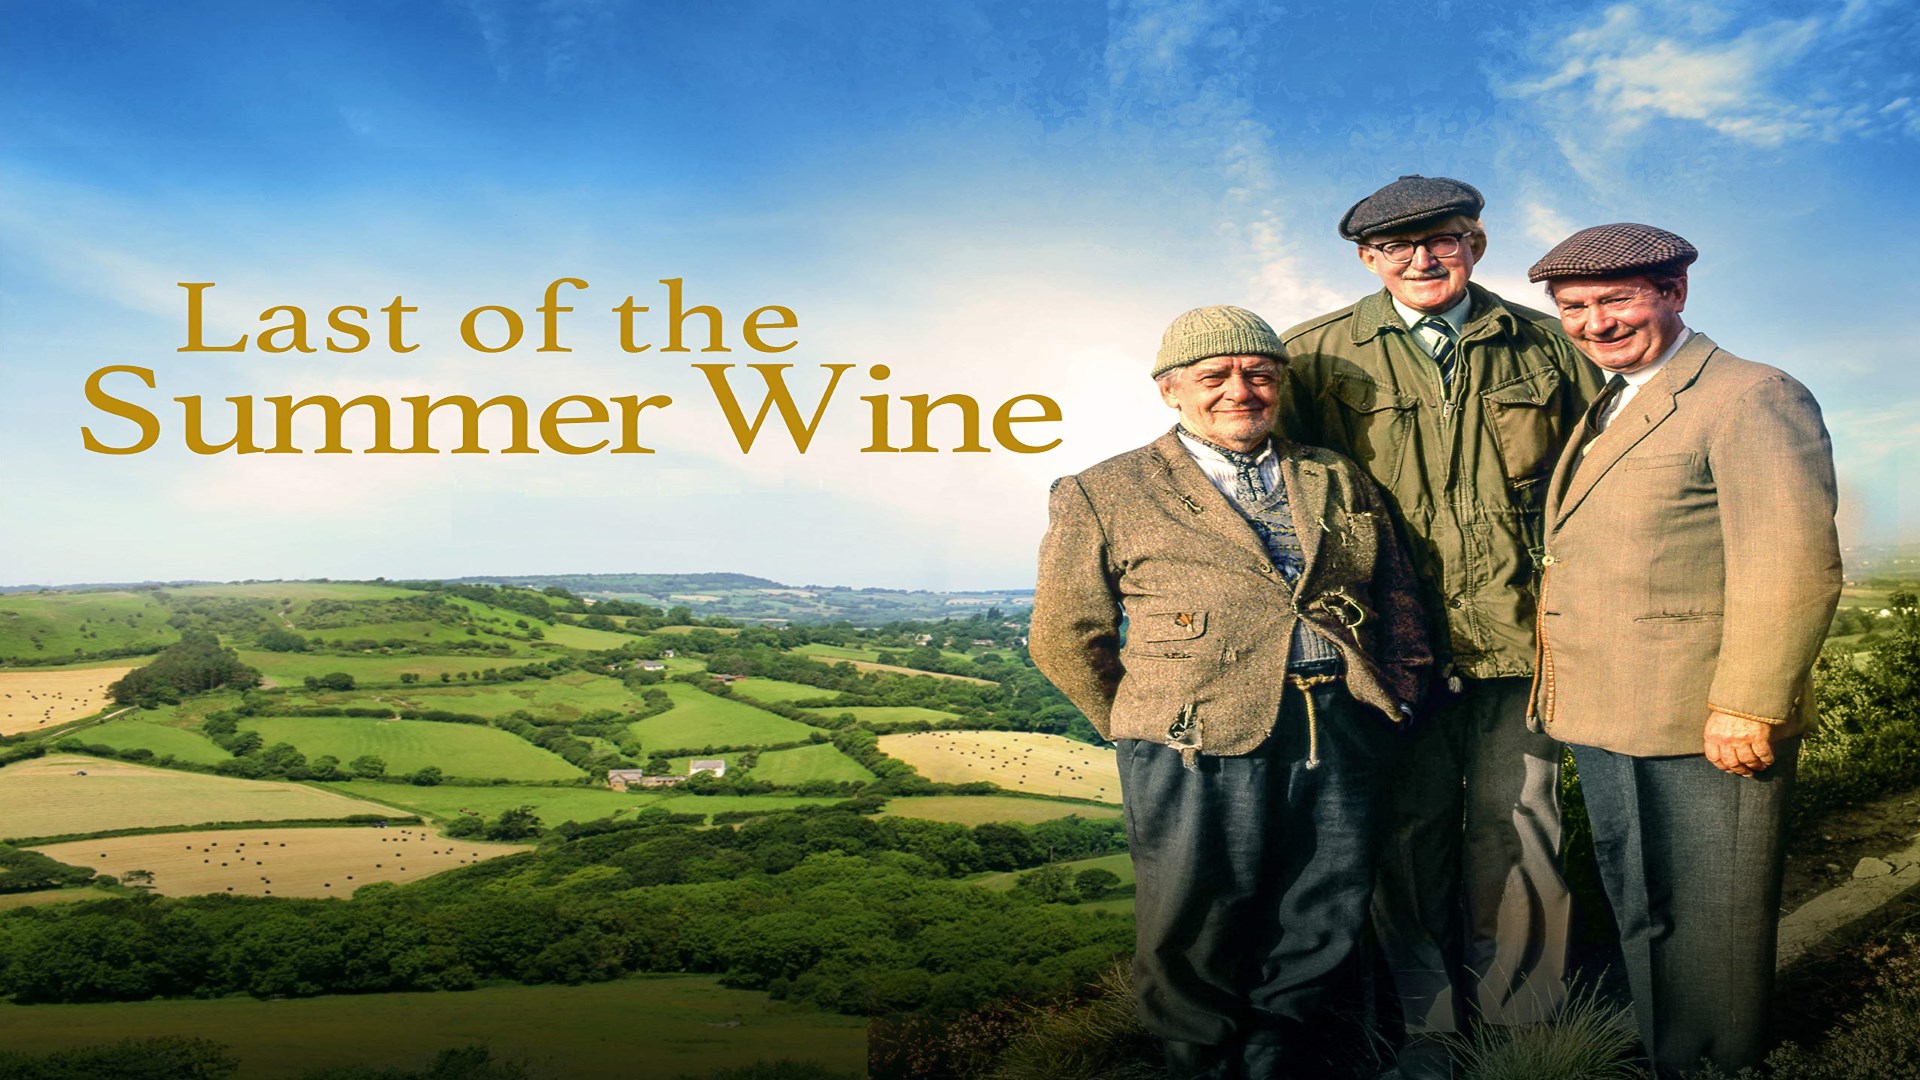 Last of the Summer Wine (TV Series 1973 - 2010) - How Many Series Of Last Of The Summer Wine